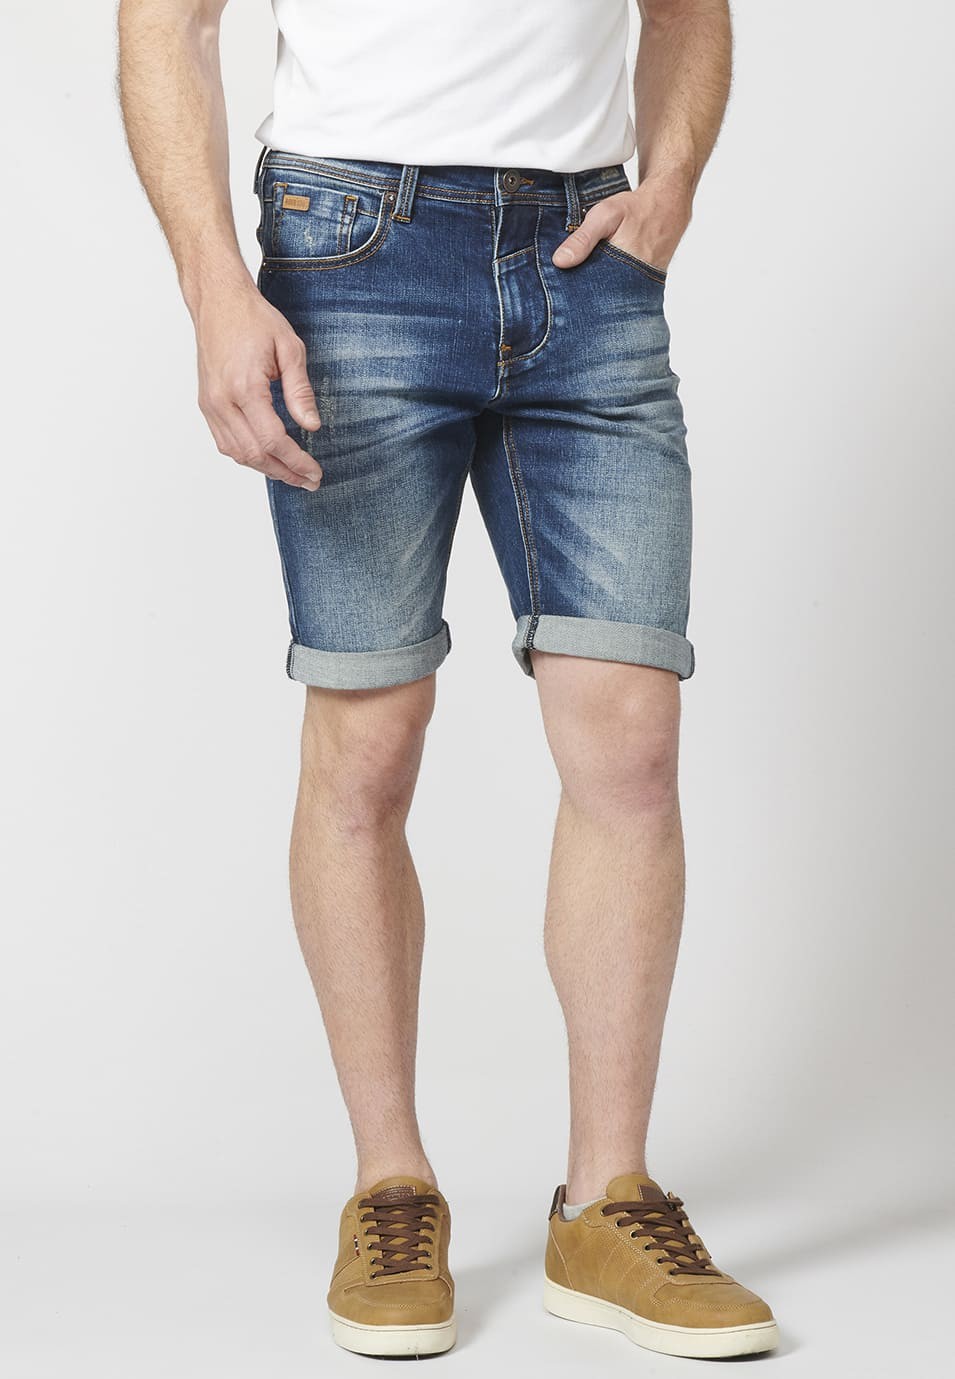 Jeansshorts in normaler Passform